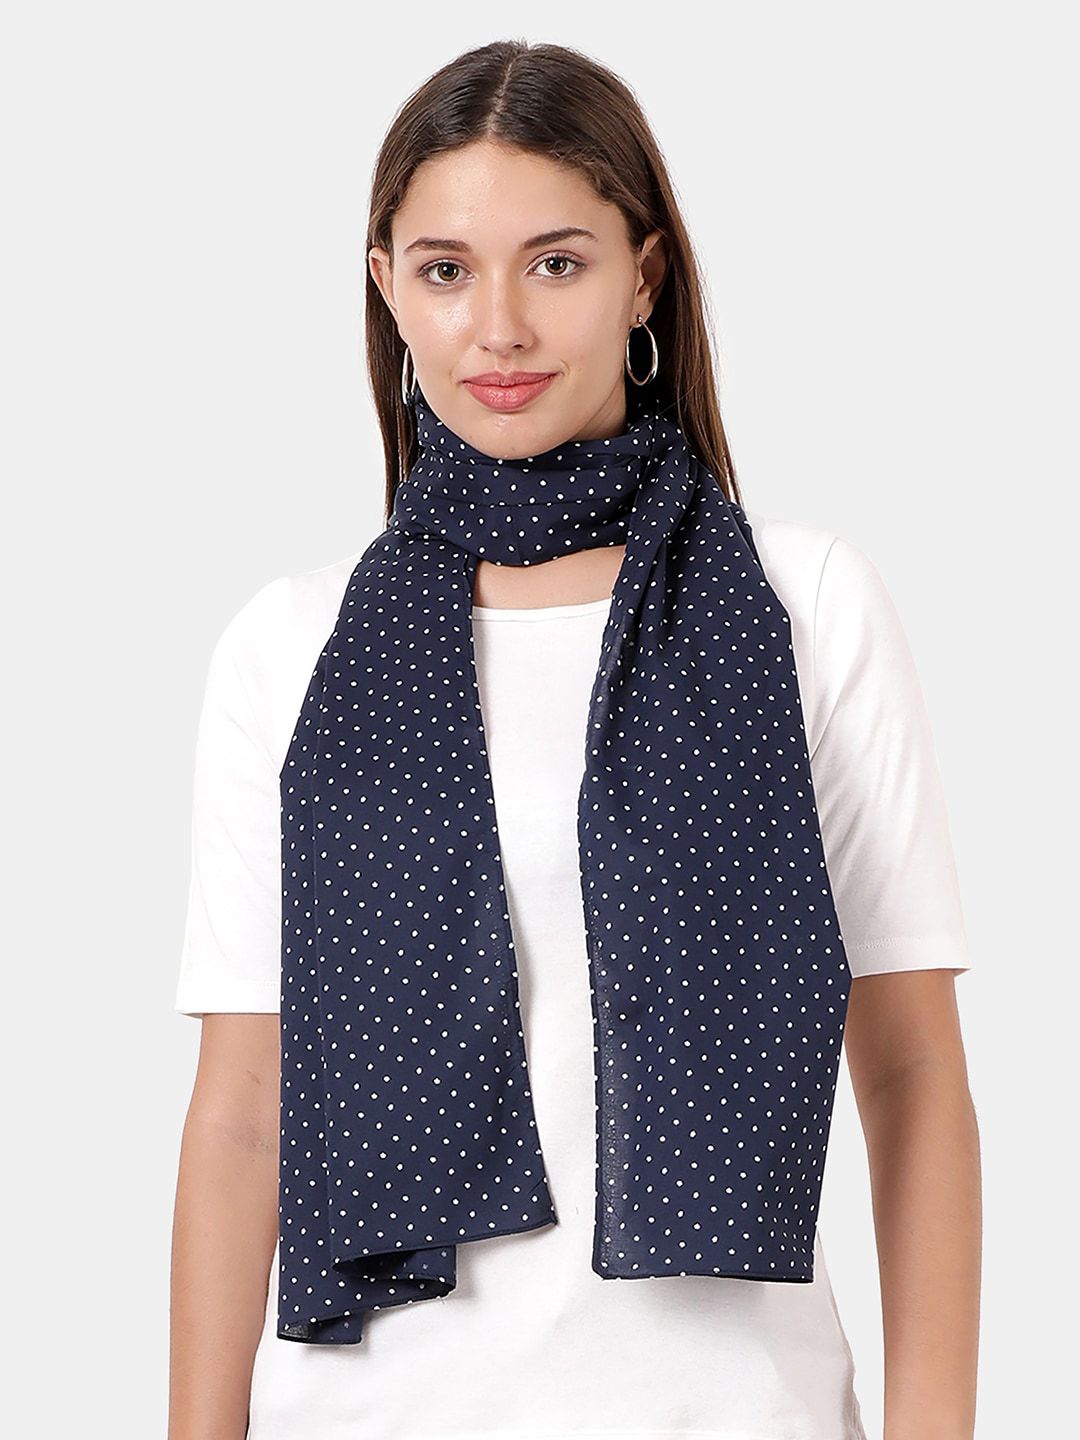 Llak Jeans Women Navy Blue & White Polka Dot Printed Stole Price in India